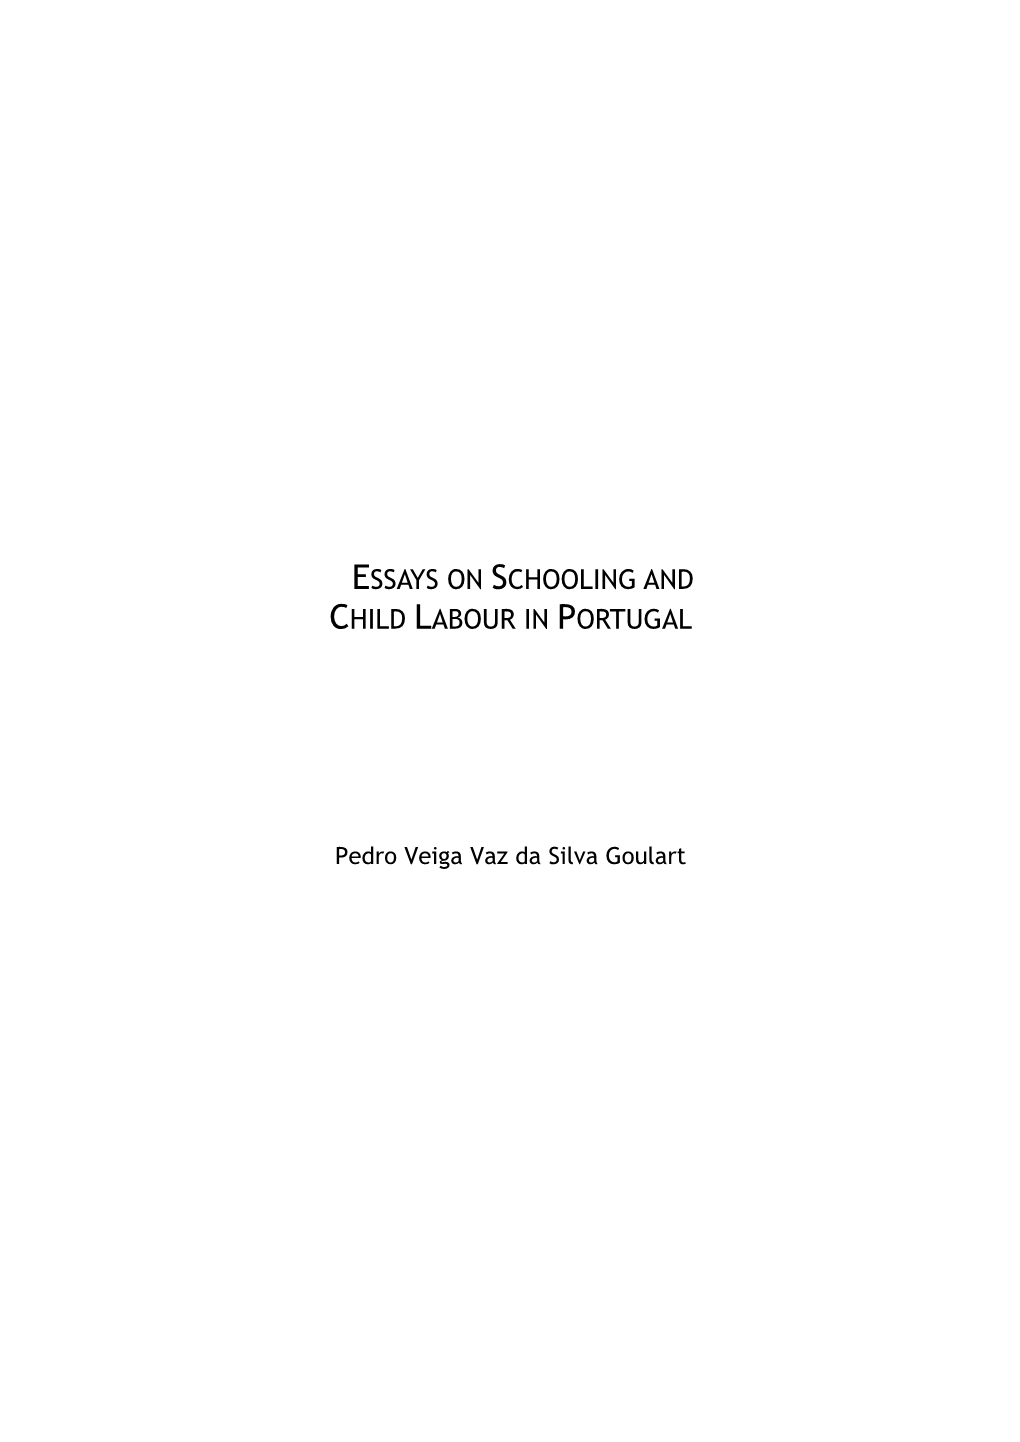 Essays on Schooling and Child Labour in Portugal